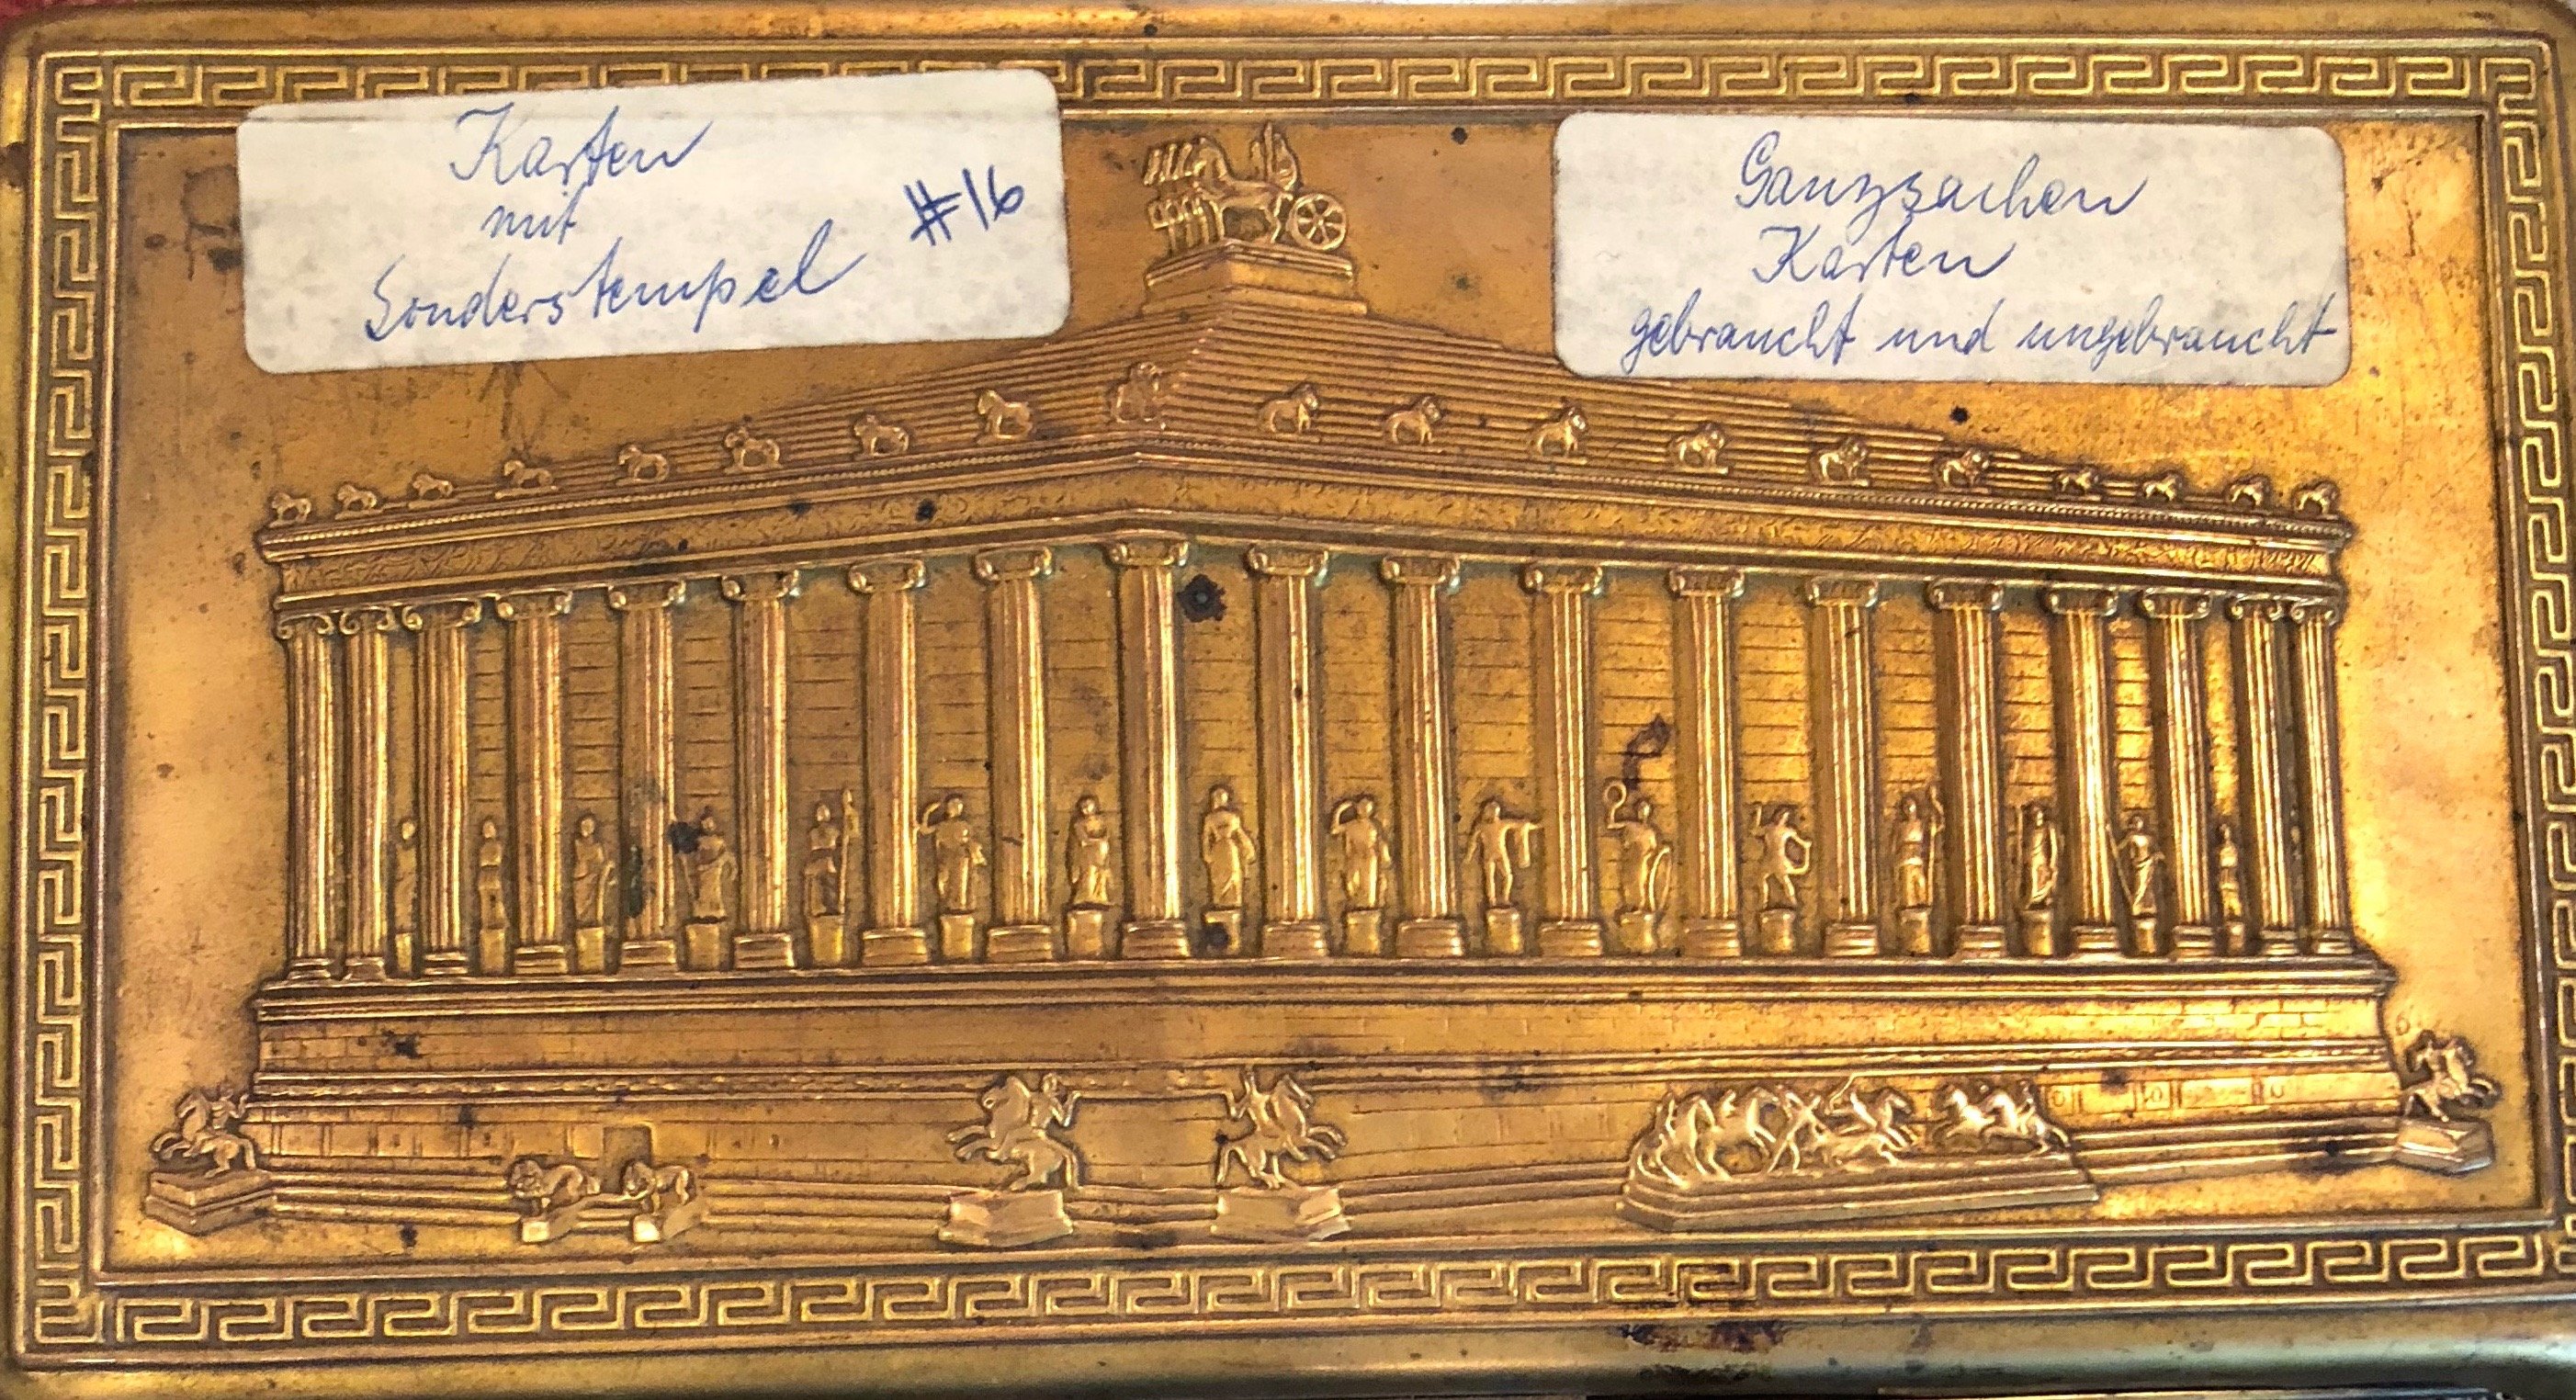 A gold metal box with a carving of the Parthenon and a German label.